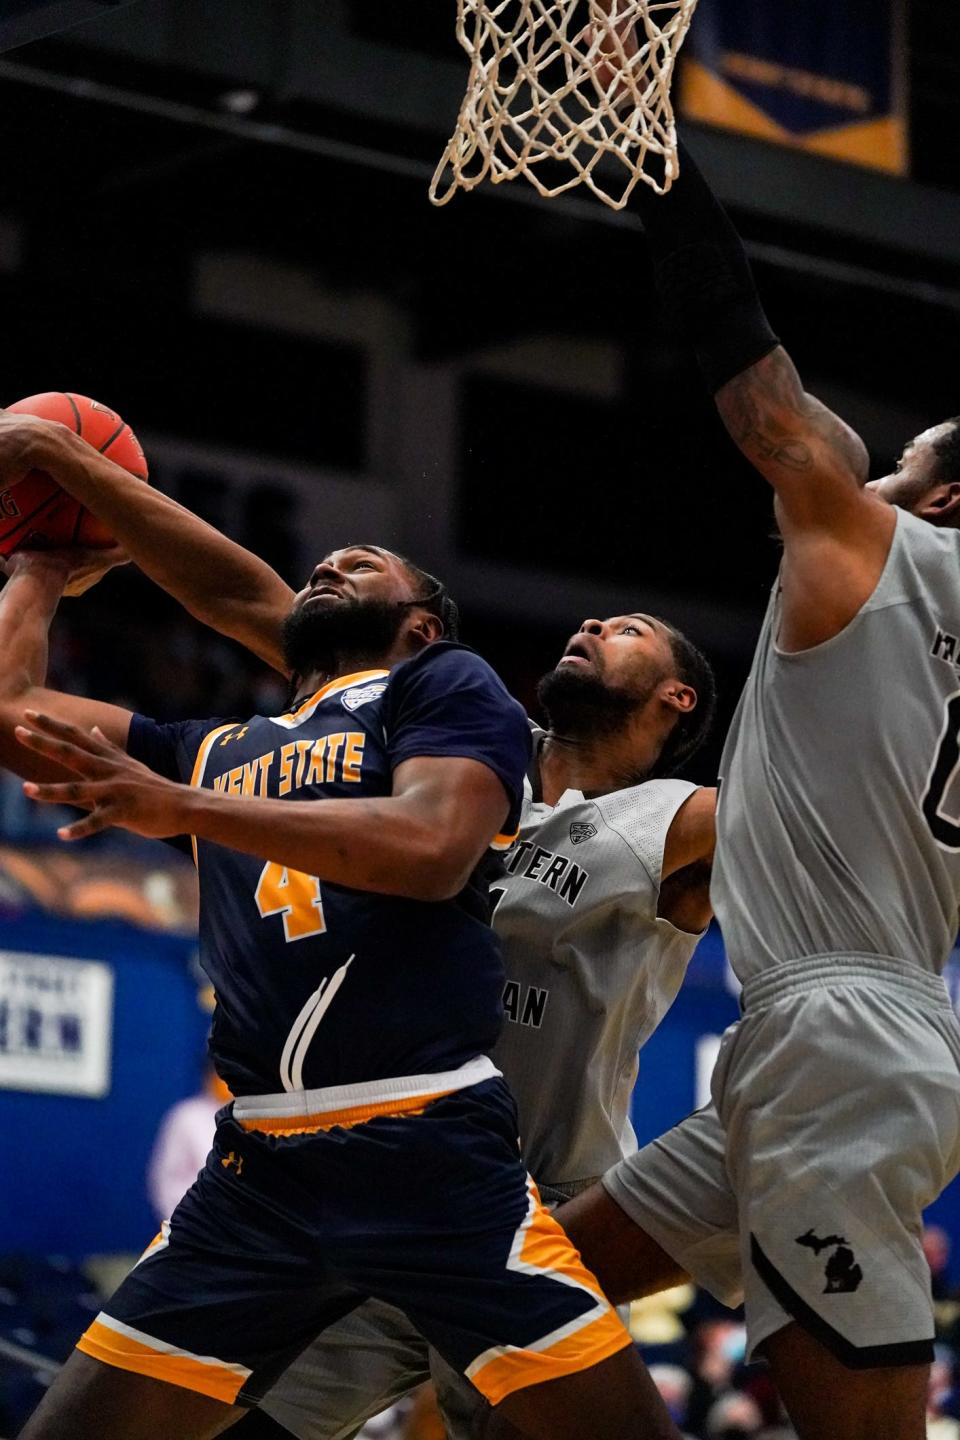 Kent State grad transfer guard Andrew Garcia gets fouled while attacking the basket against Western Michigan's defense on Tuesday at the M.A.C. Center.